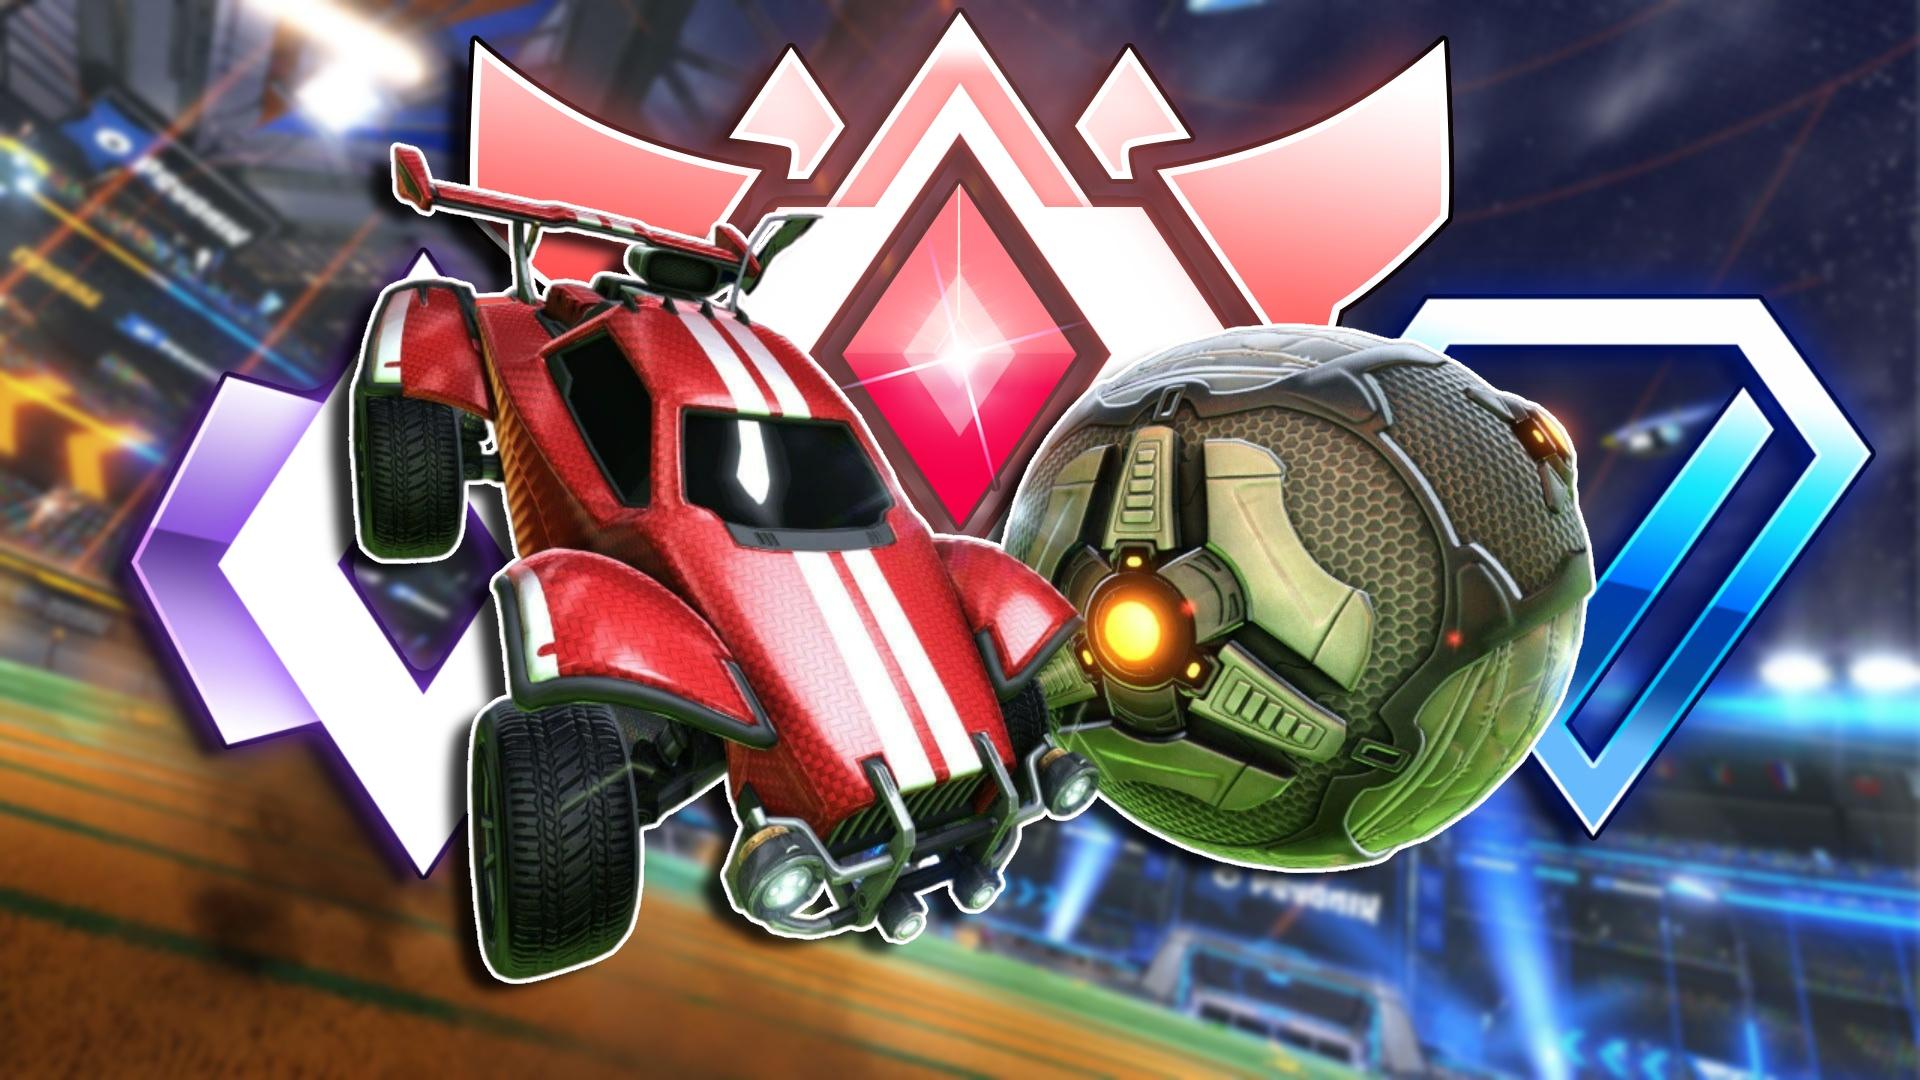 Rocket League Free To Play Arrives September 23